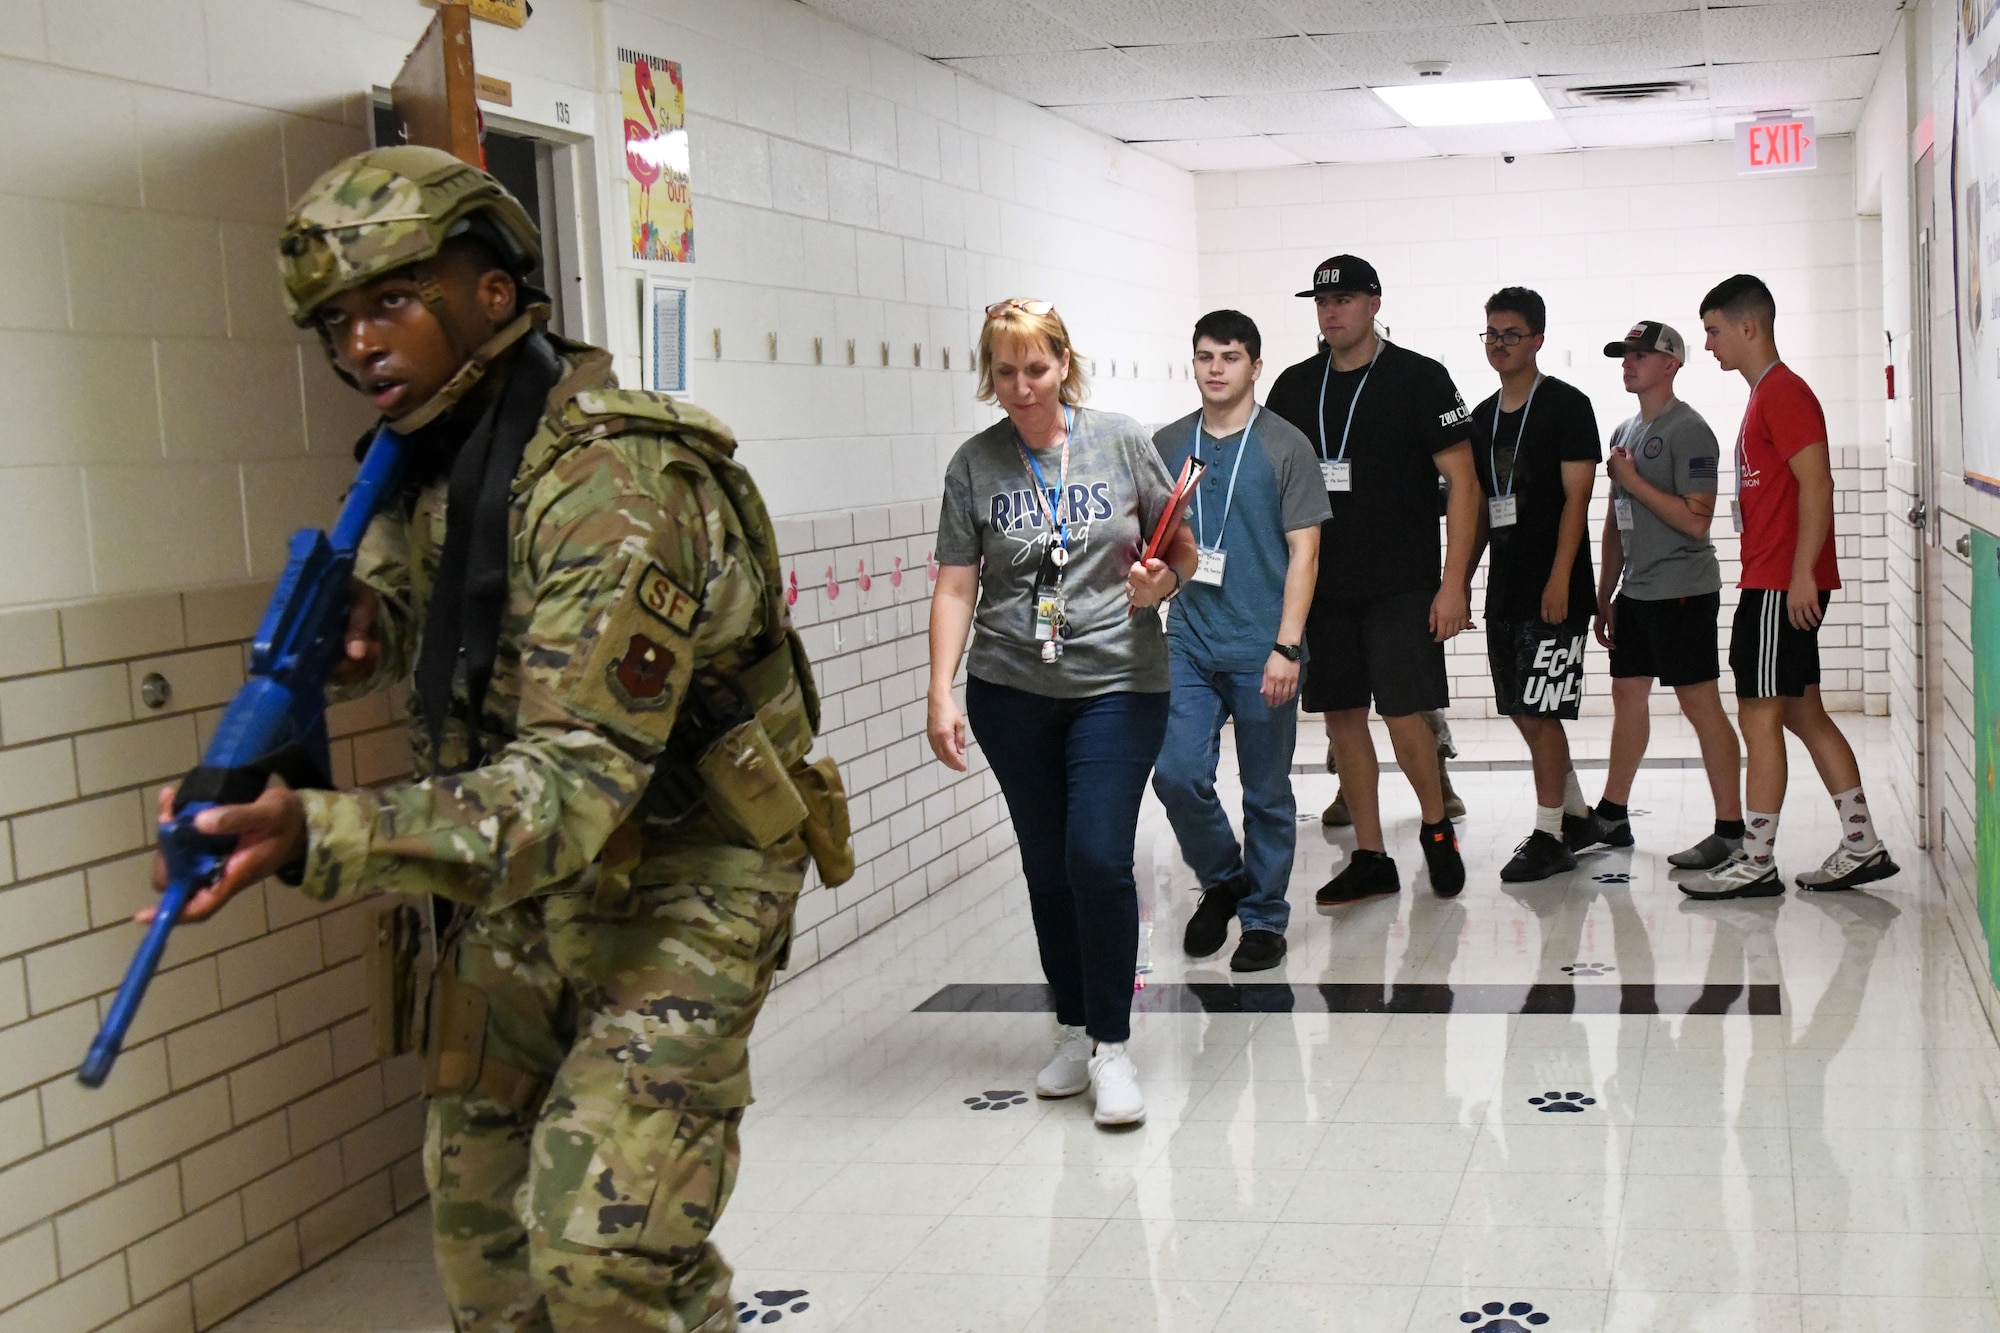 A defender from the 97th Security Forces Squadron escorts “victims” to safety during an active shooter training exercise at Altus Air Force Base, Oklahoma, Aug. 10, 2022. During the exercise, defenders cleared all rooms in the school and led everyone to safety. (U.S. Air Force photo by Airman 1st Class Miyah Gray)